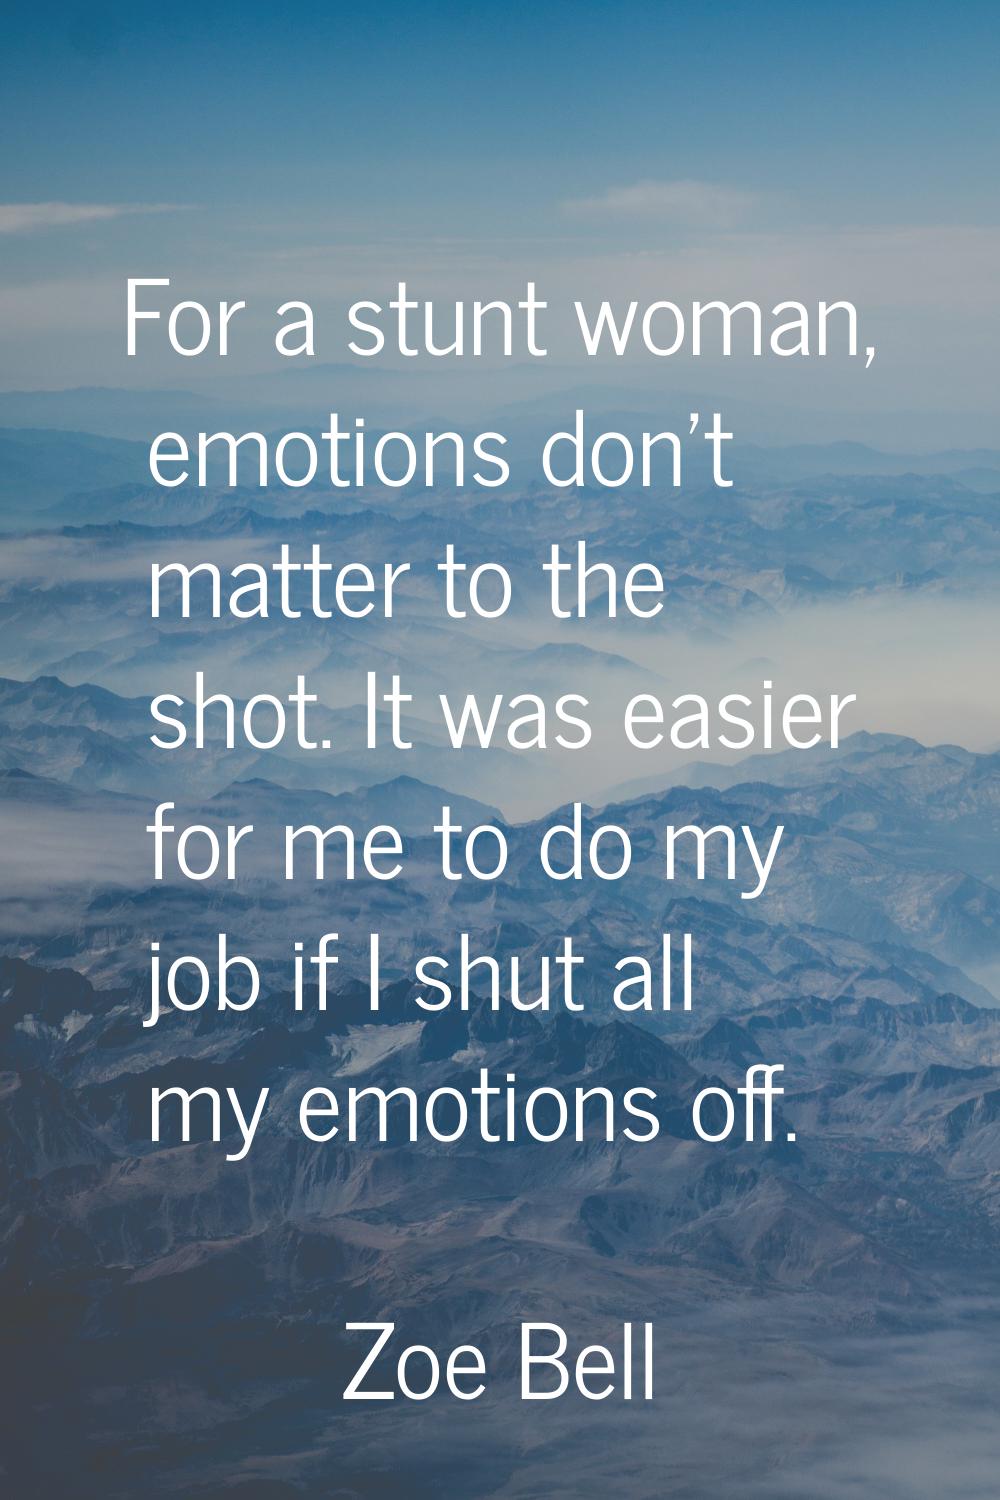 For a stunt woman, emotions don't matter to the shot. It was easier for me to do my job if I shut a